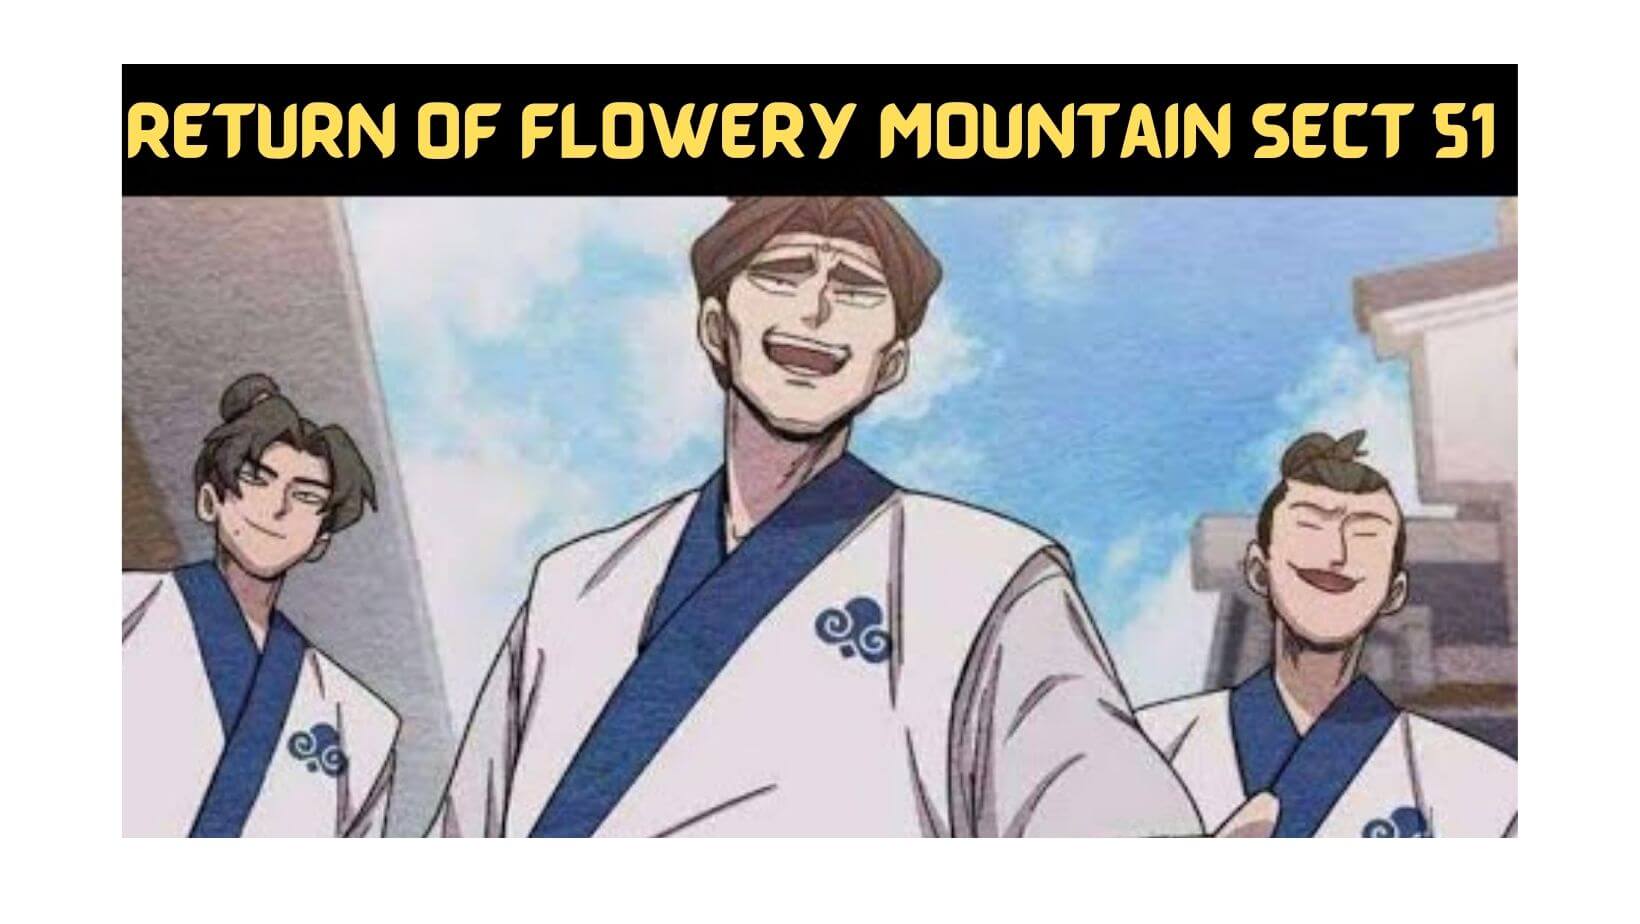 Return Of Flowery Mountain Sect 51